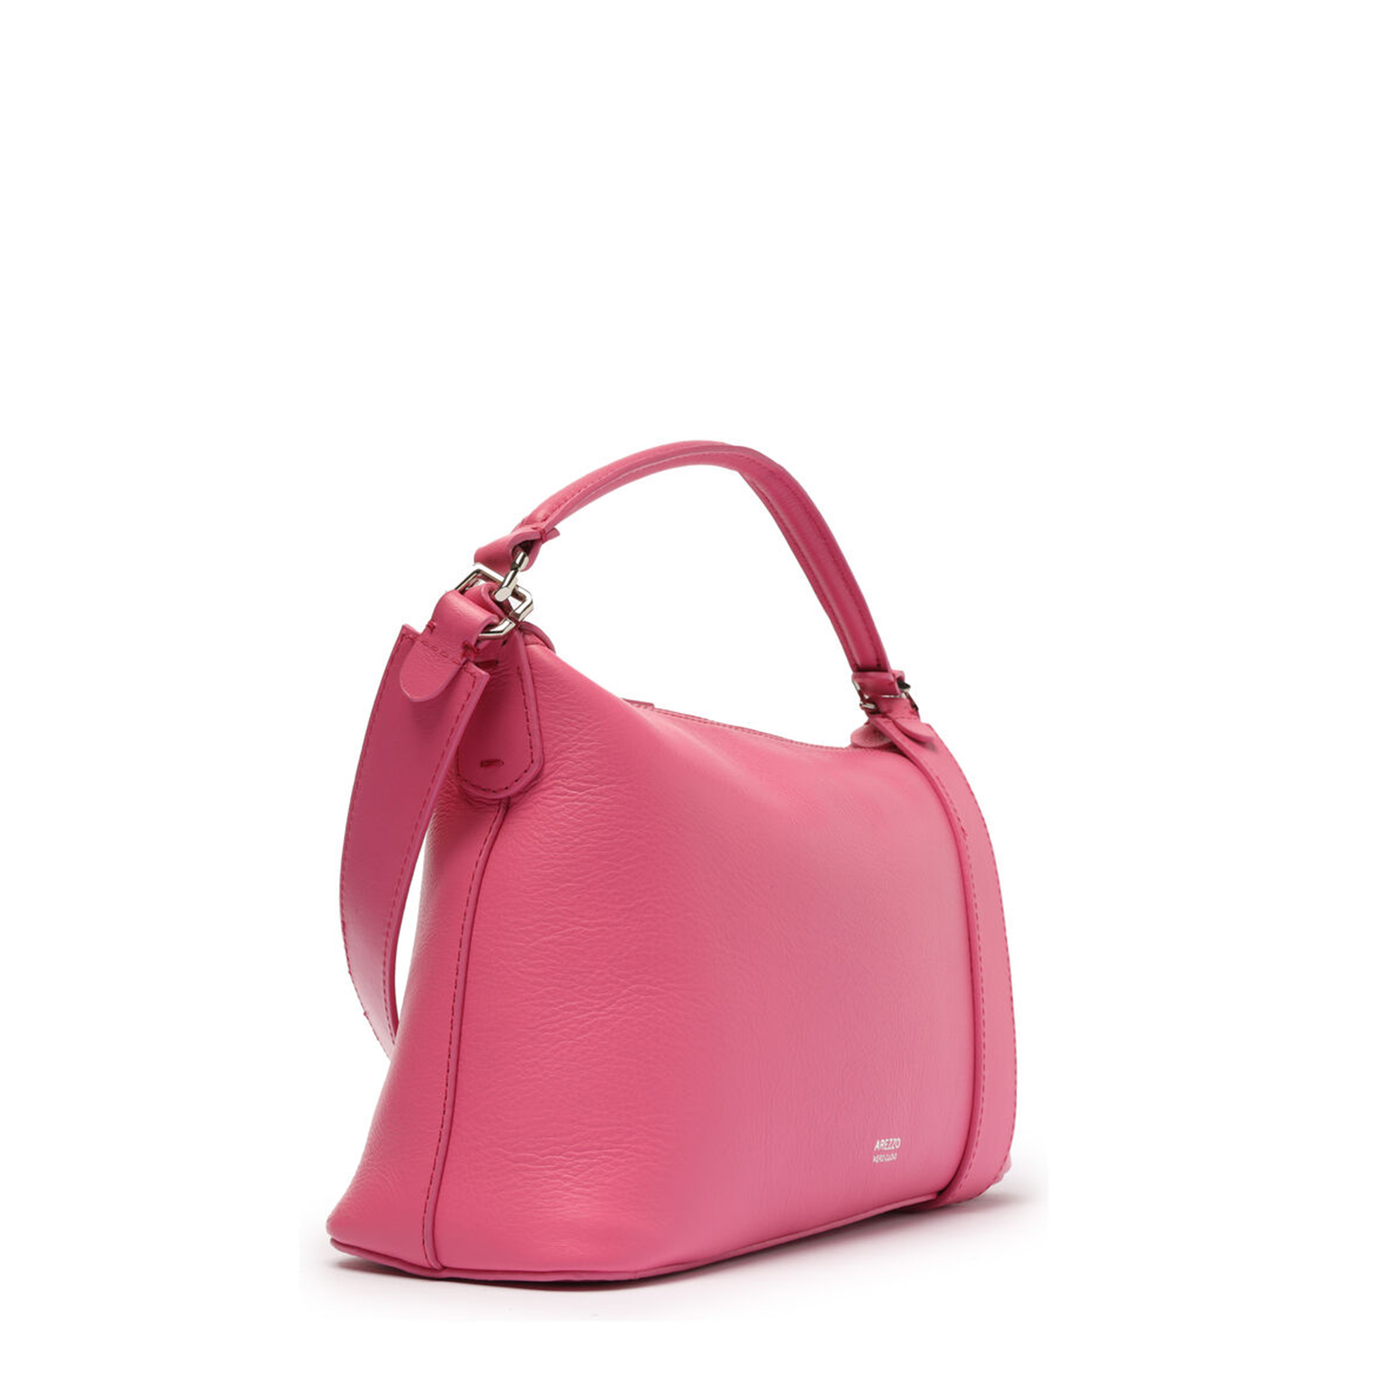 CARTERA LEATHER PINK BLOW